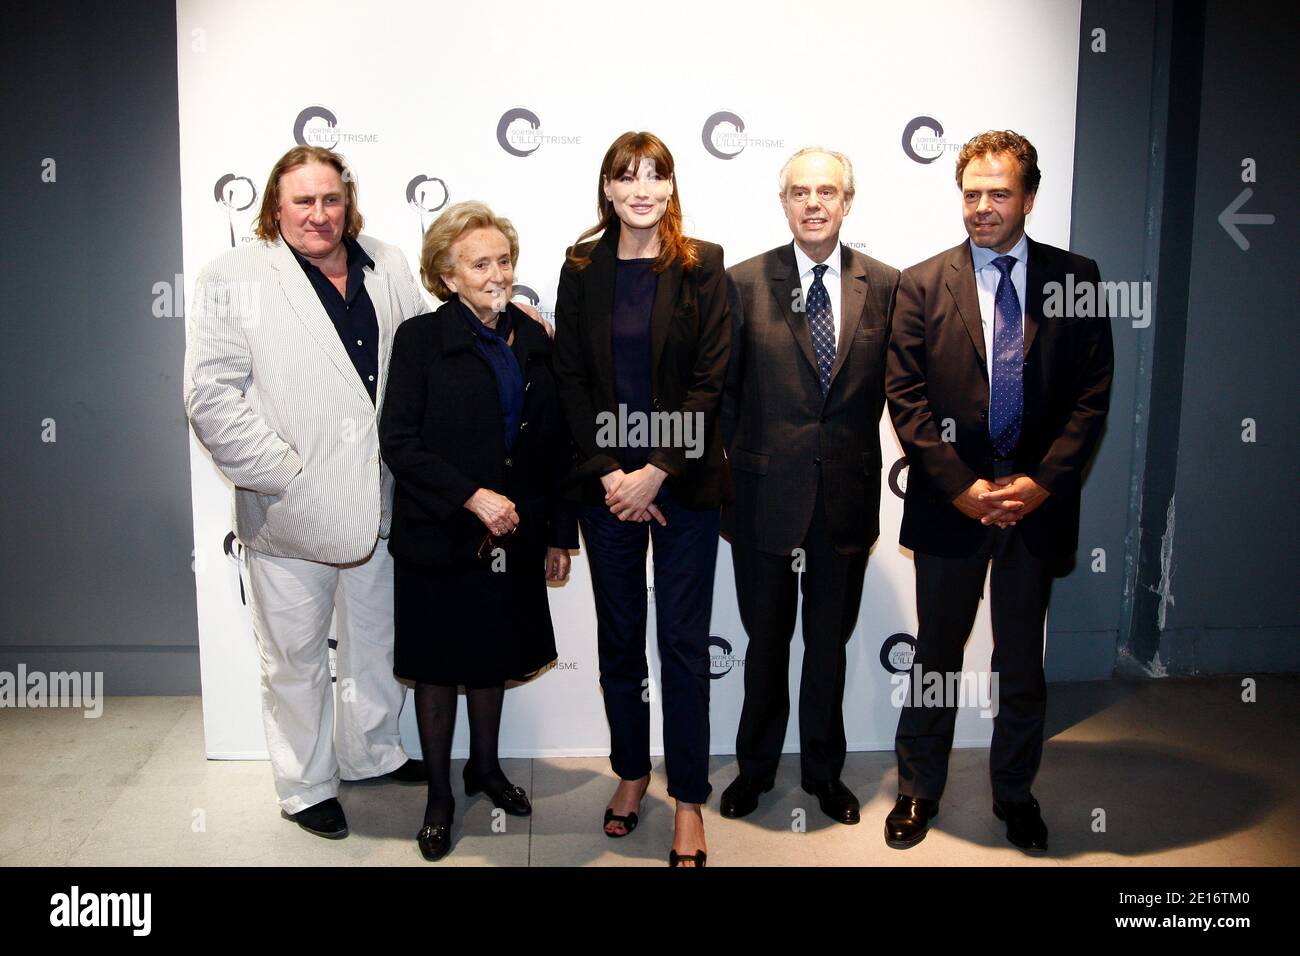 French actor Gerard Depardieu, former first lady Bernadette Chirac, French First Lady Carla Bruni-Sarkozy, Culture Minister Frederic Mitterrand and Minister for National Education, Youth and Voluntary Organizations Luc Chatel pose before the launch of Bruni-Sarkozy's foundation to combat illiteracy at Centre Pompidou modern art museum, also known as Beaubourg, in Paris, France on May 17, 2011. French President Nicolas Sarkozy's father, Pal Sarkozy was quoted by a German newspaper Bild today as saying that first lady Carla Bruni is expecting a child, apparently confirming the subject of weeks o Stock Photo